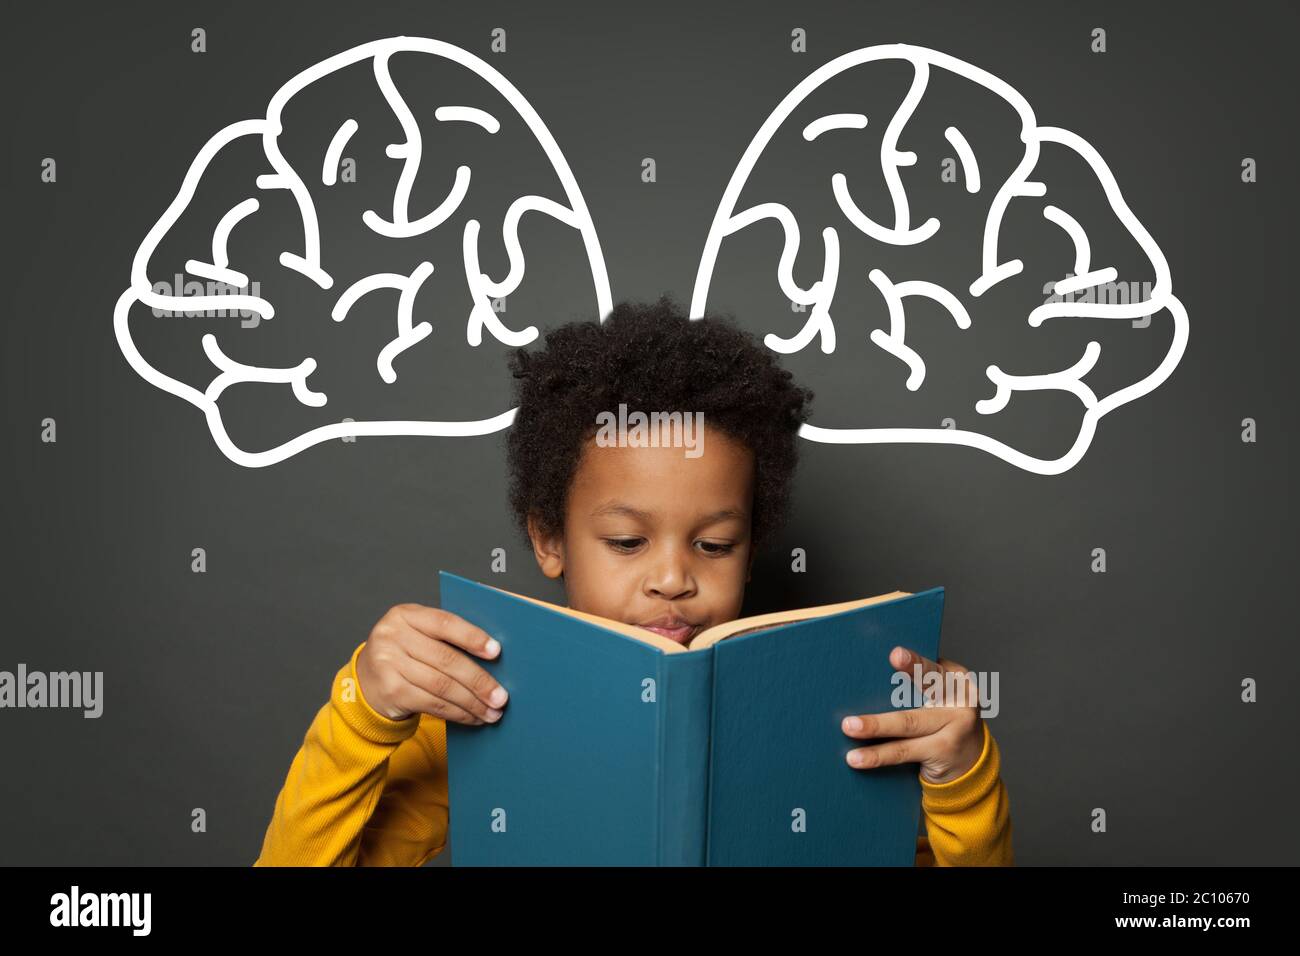 Cute black child reading book on chalkboard background, education concept Stock Photo